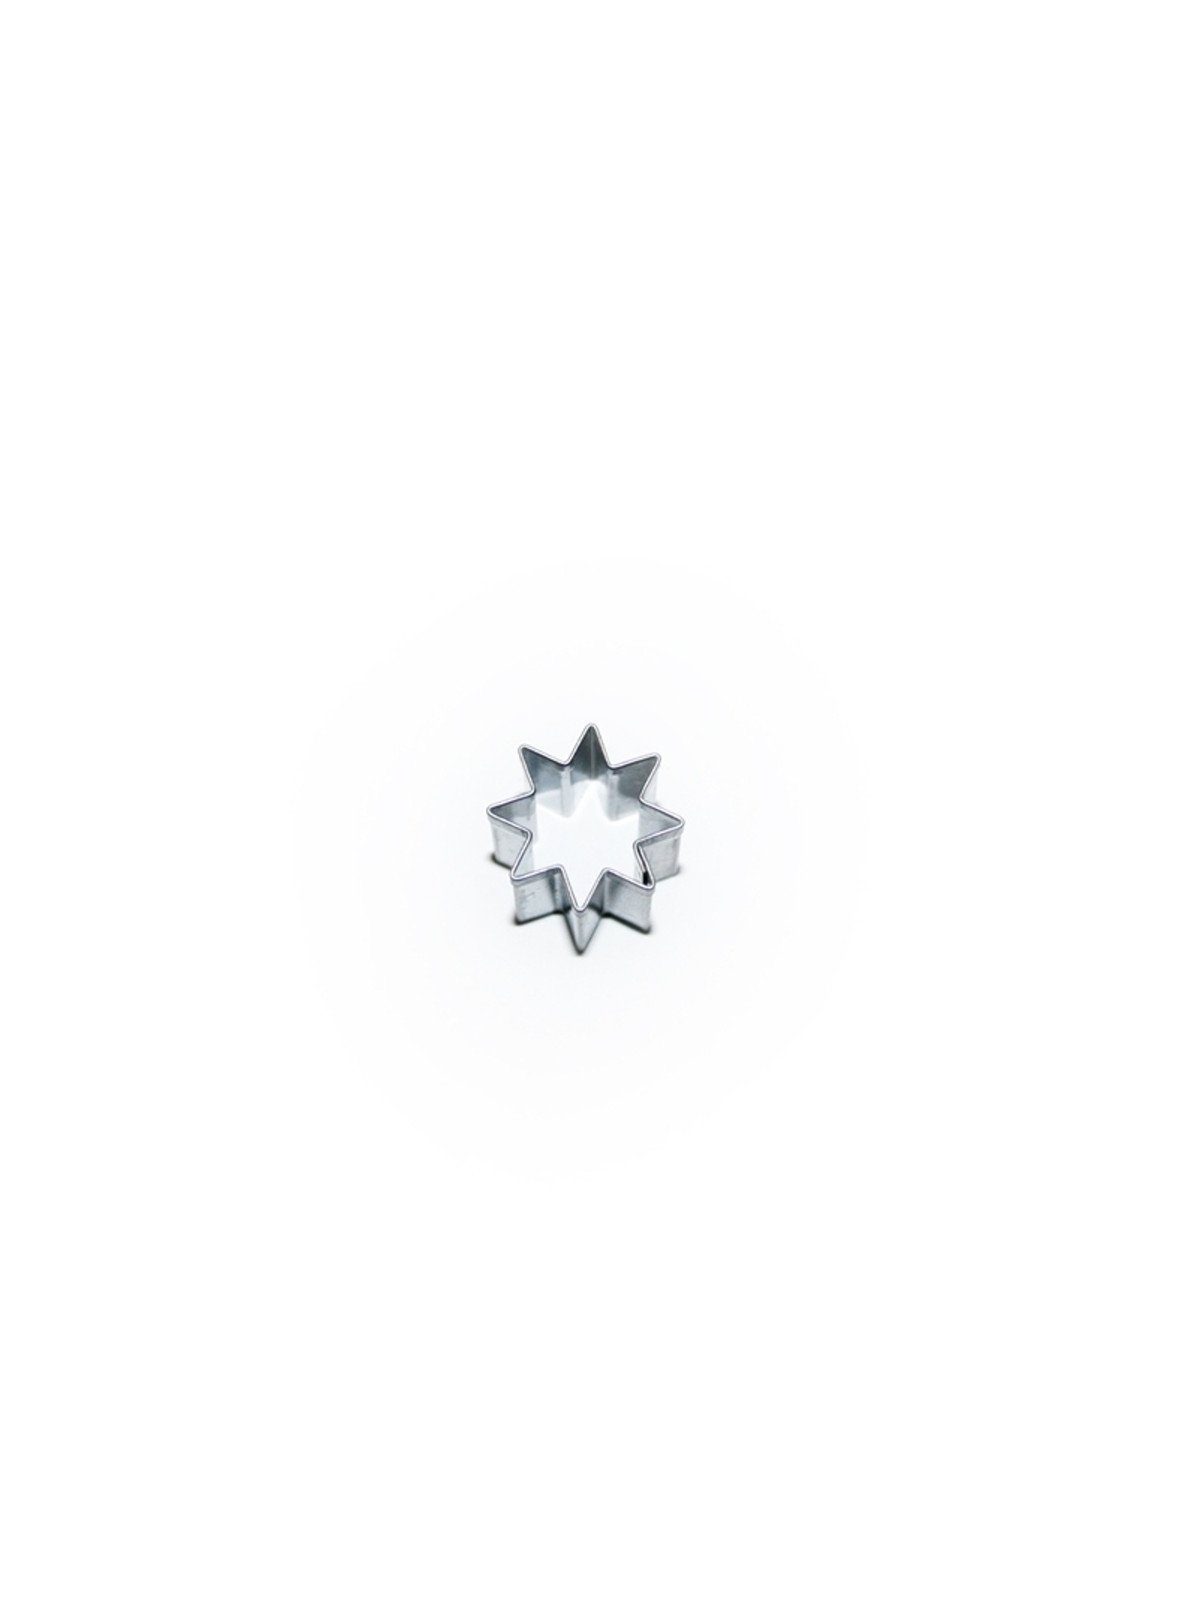 Stainless steel cutter - 8-pointed star 20mm